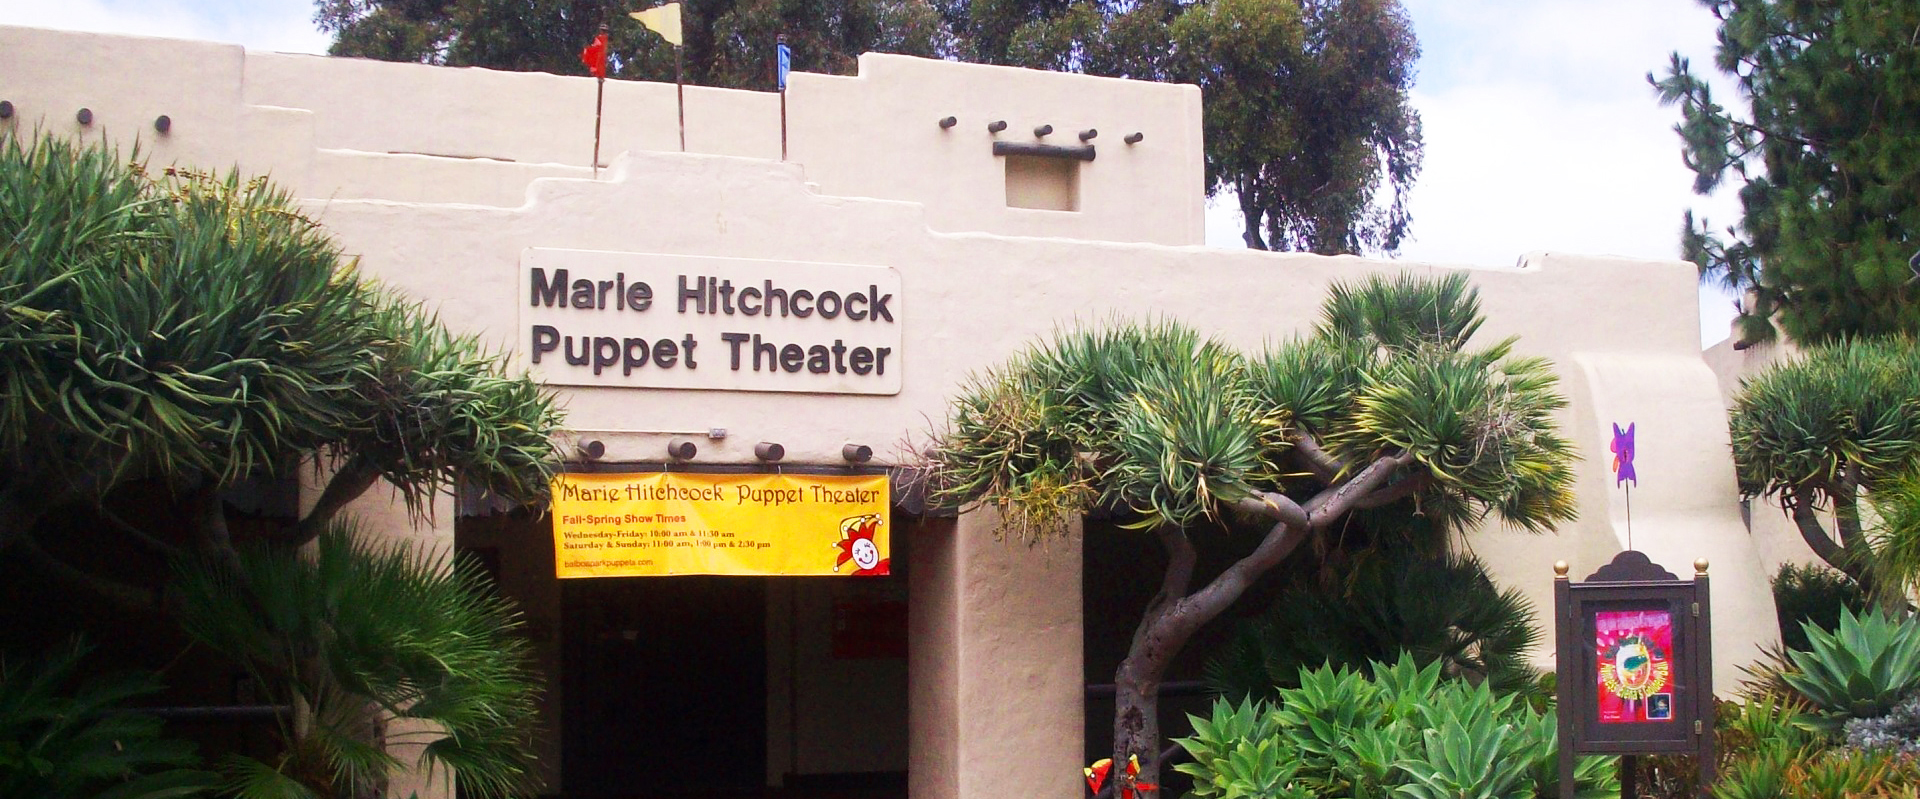 Front entrance to the Marie Hitchcock Puppet Theatre. The entrance has trees on its right and left sides. A yellow banner is seen hanging at the top of the entrance.